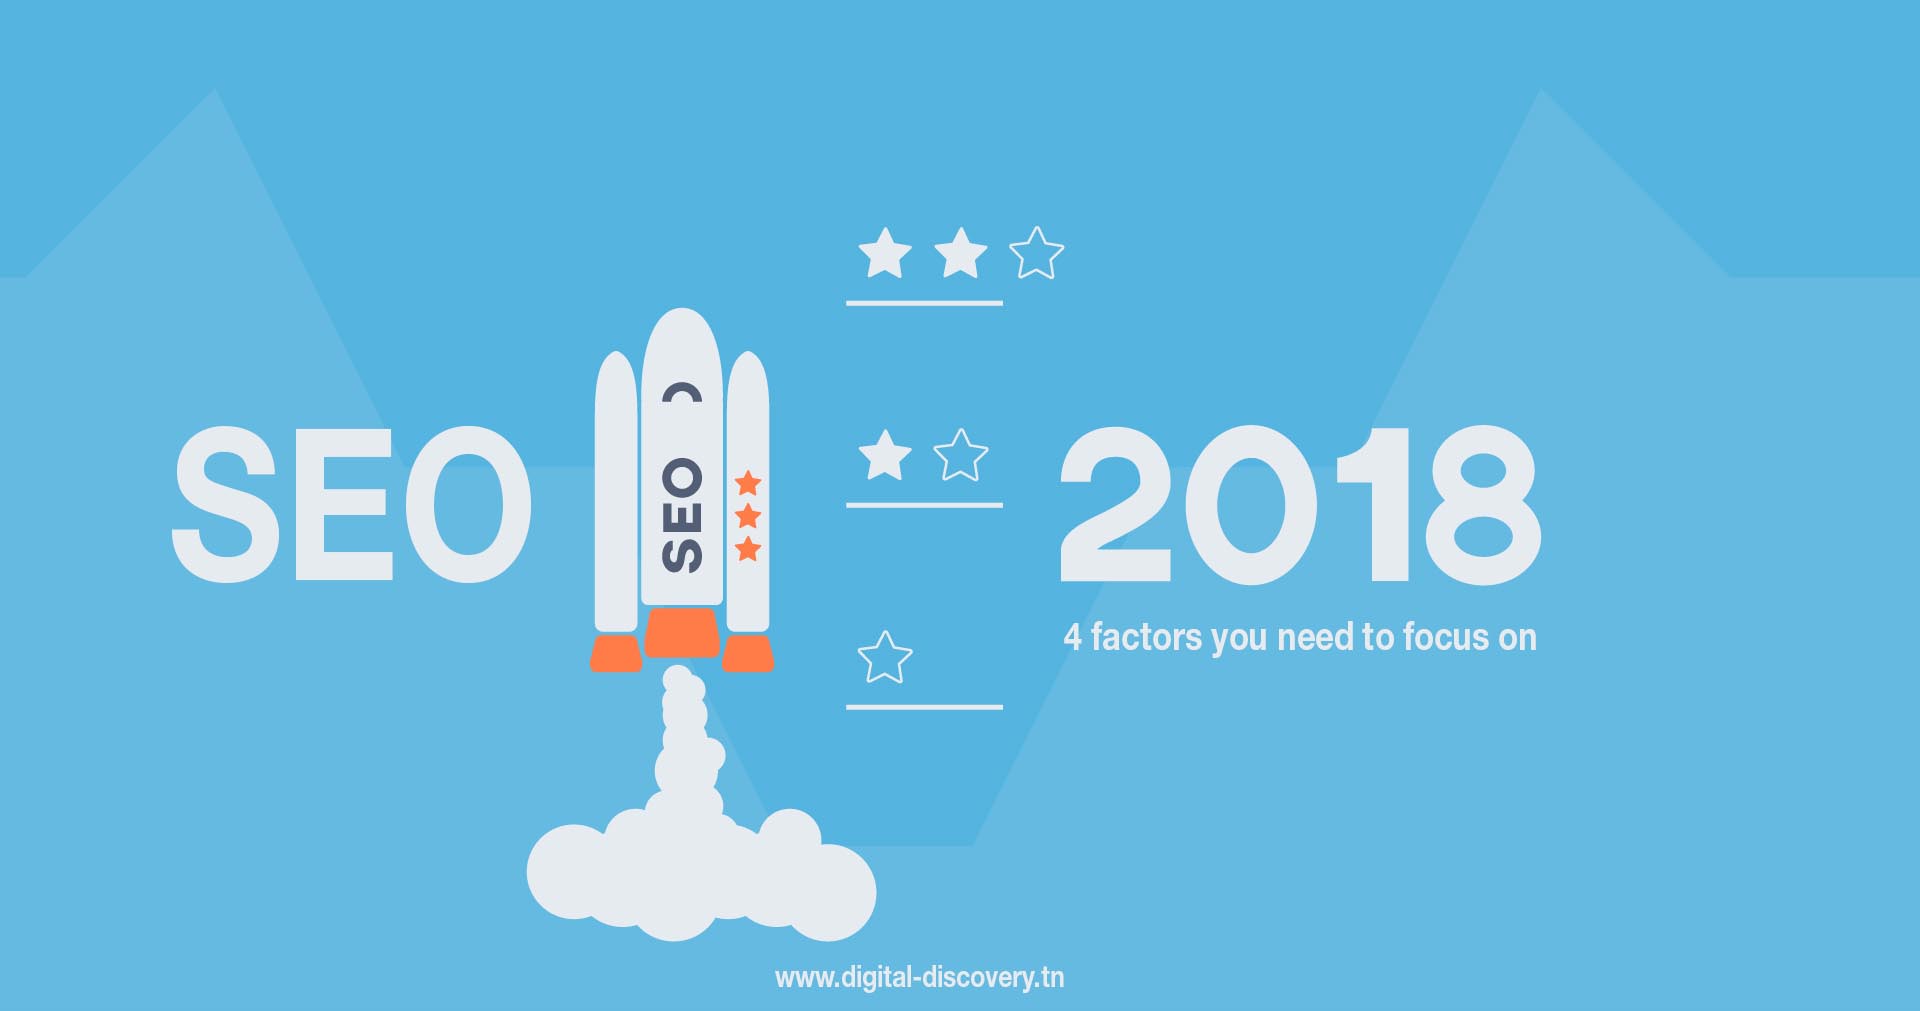  SEO : 4 factors you need to focus on in 2018